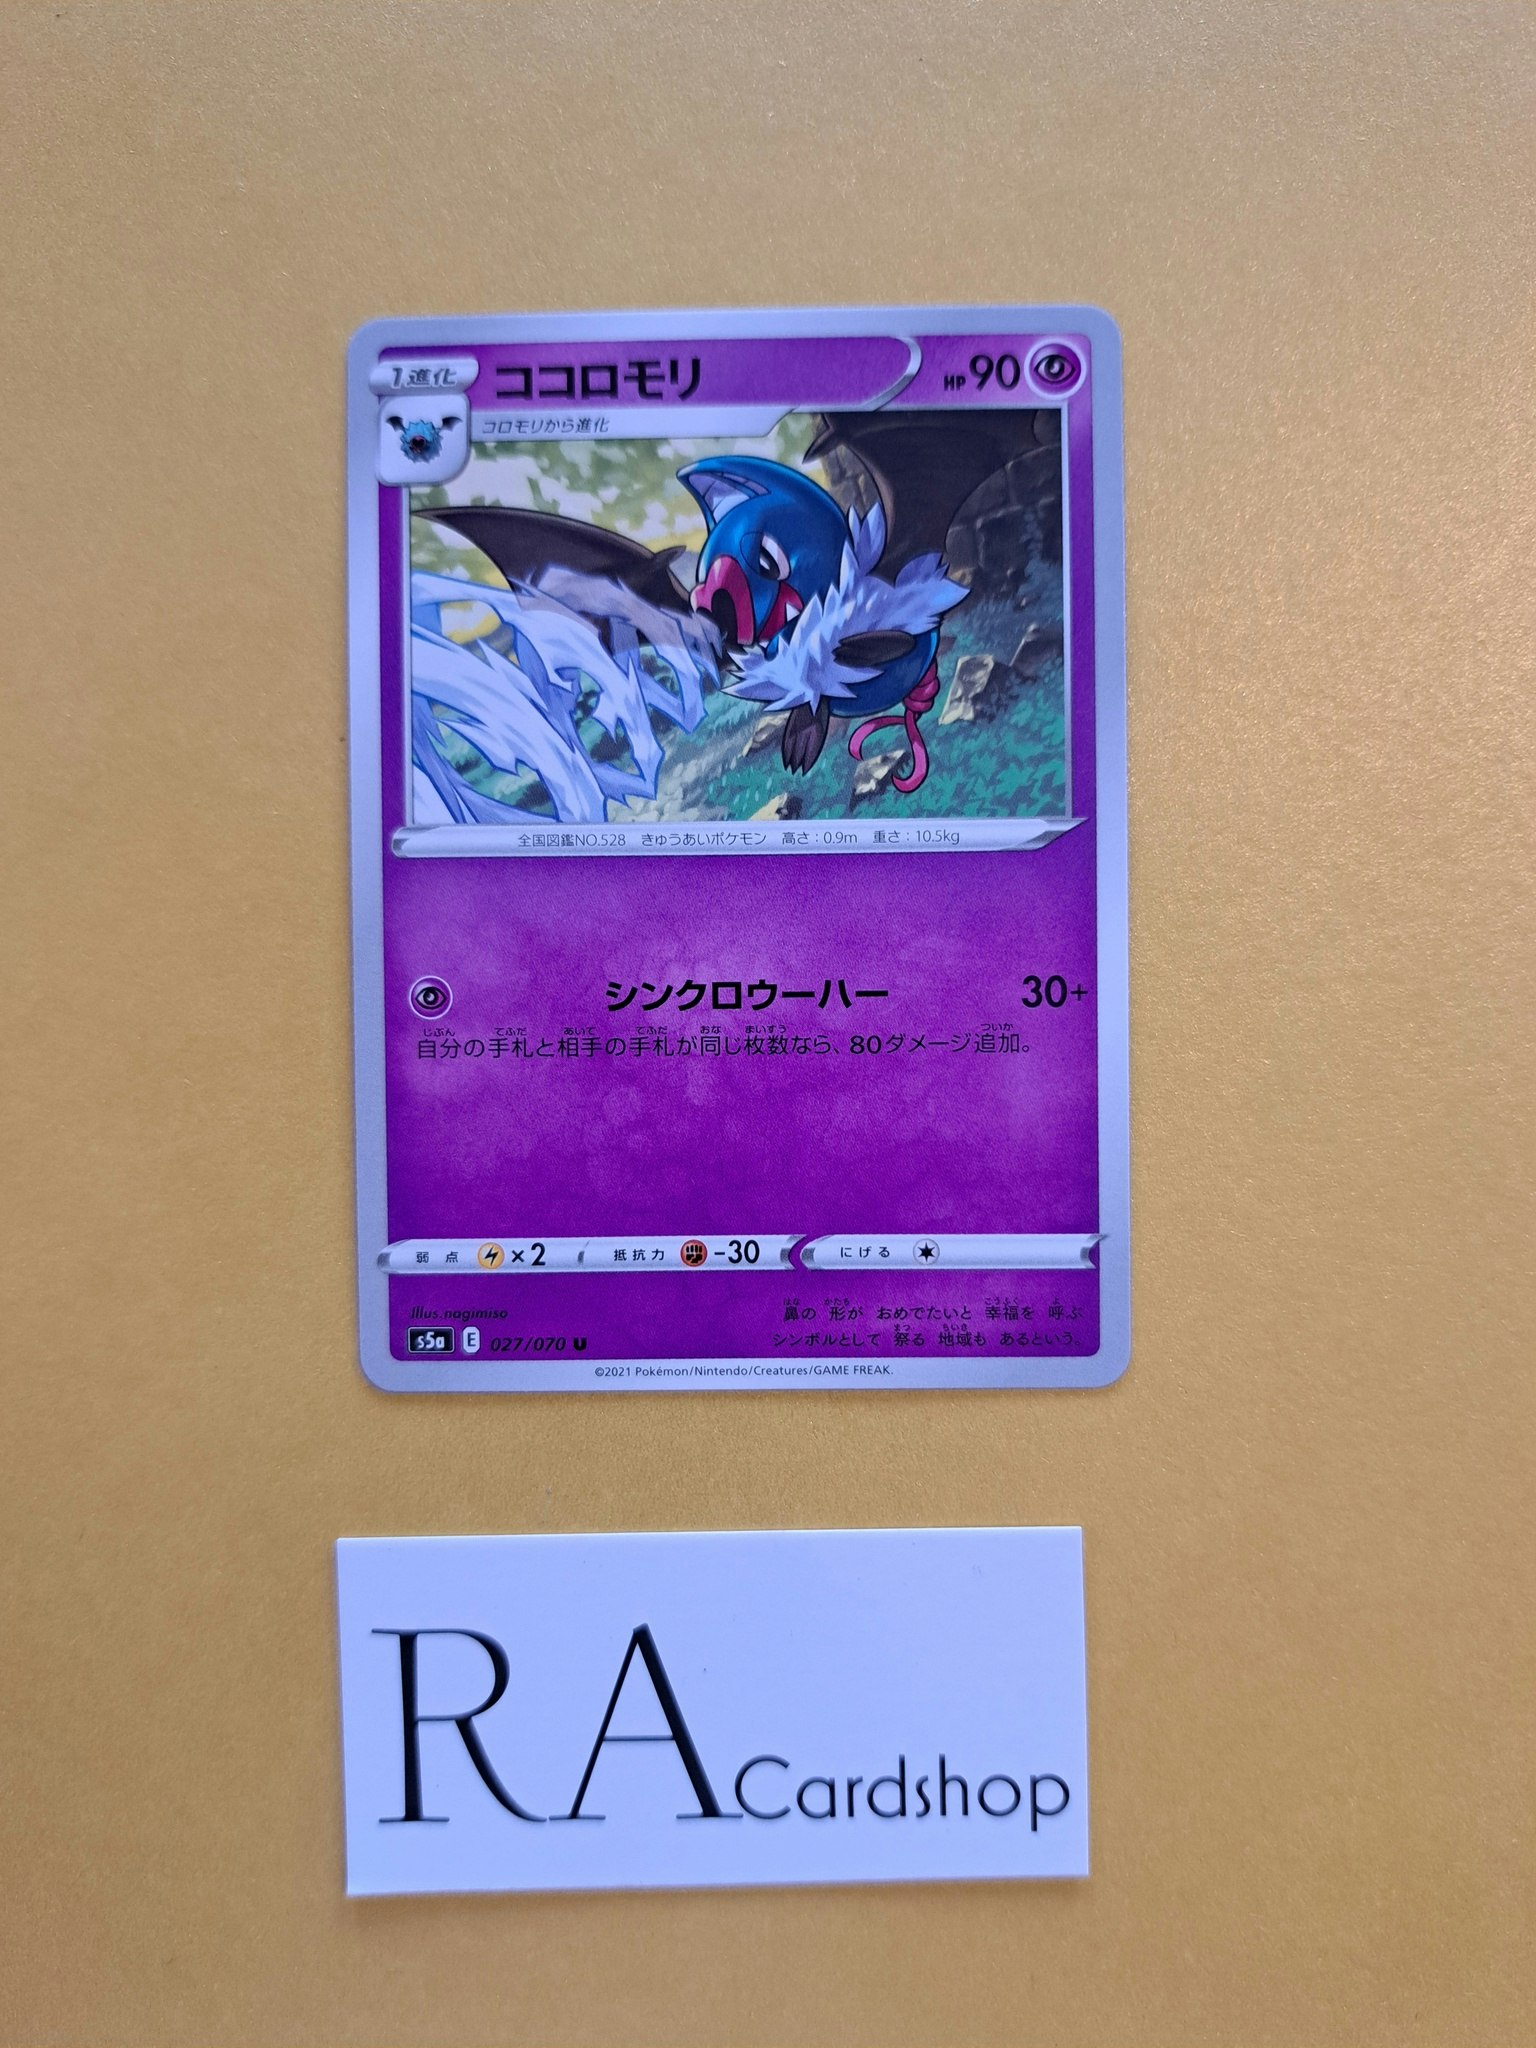 Swoobat Uncommon 027/070 Matchless Fighters s5a Pokémon